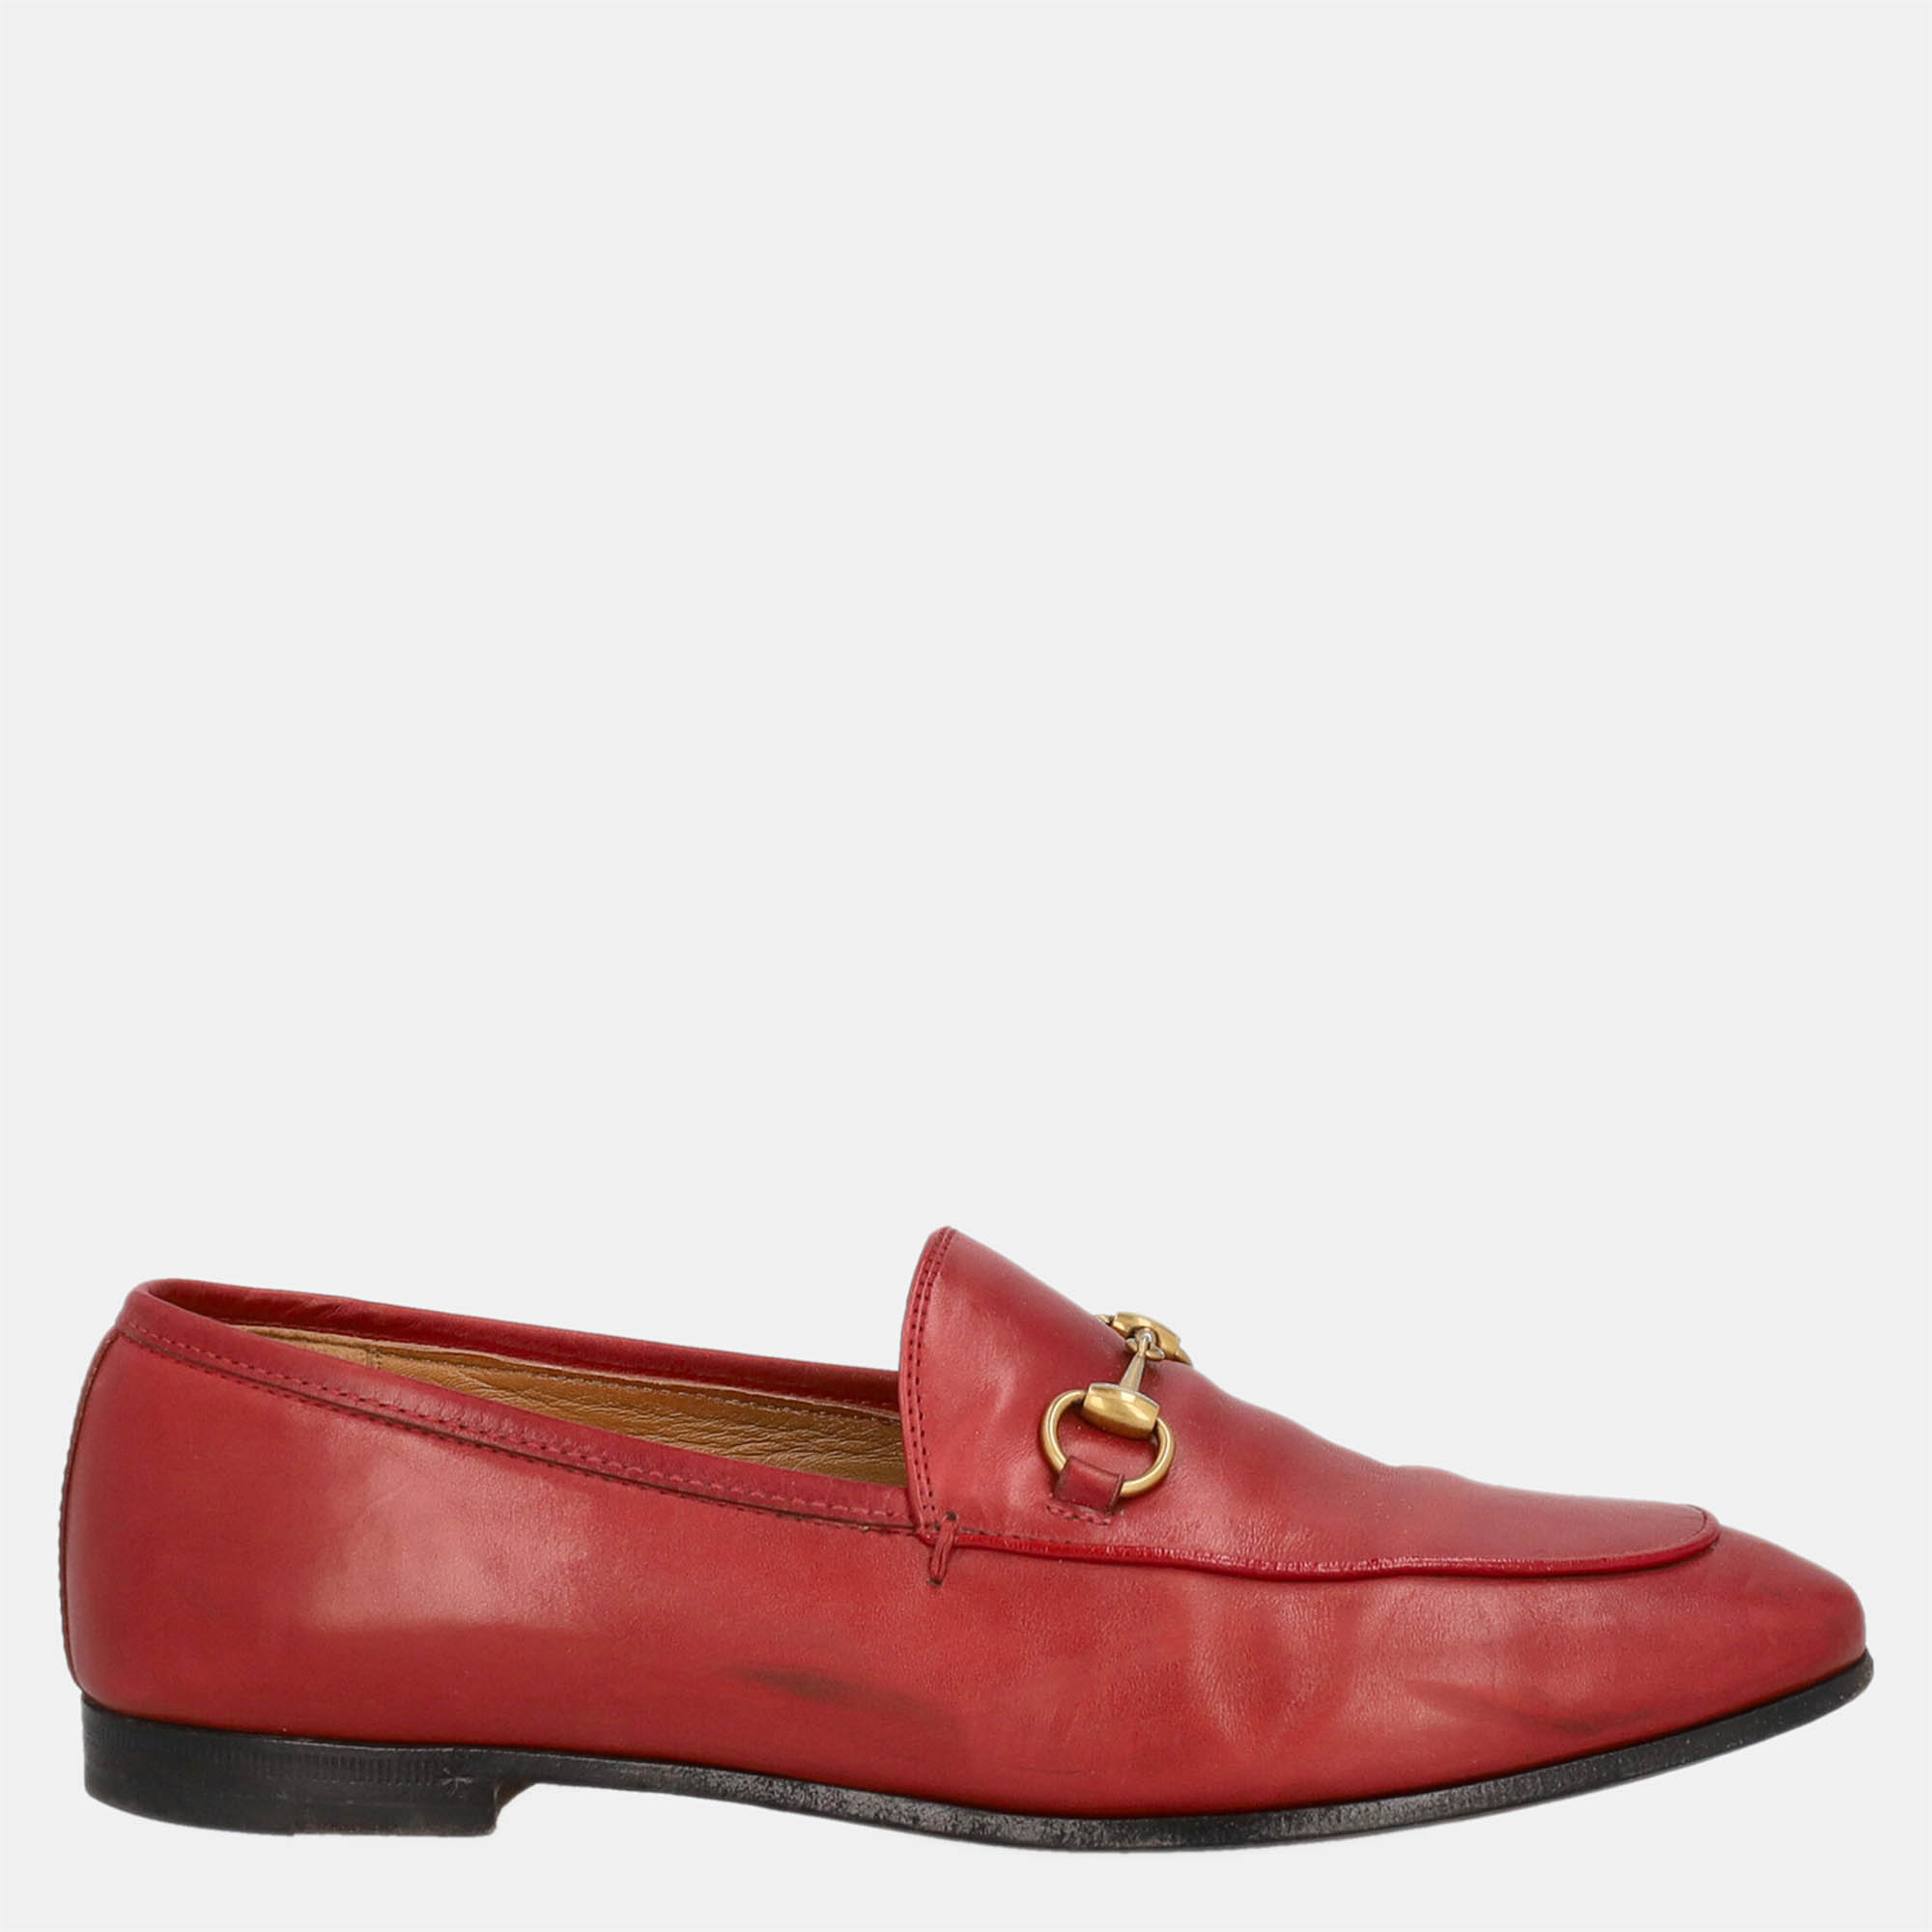 Gucci  Women's Leather Loafers - Red - EU 38